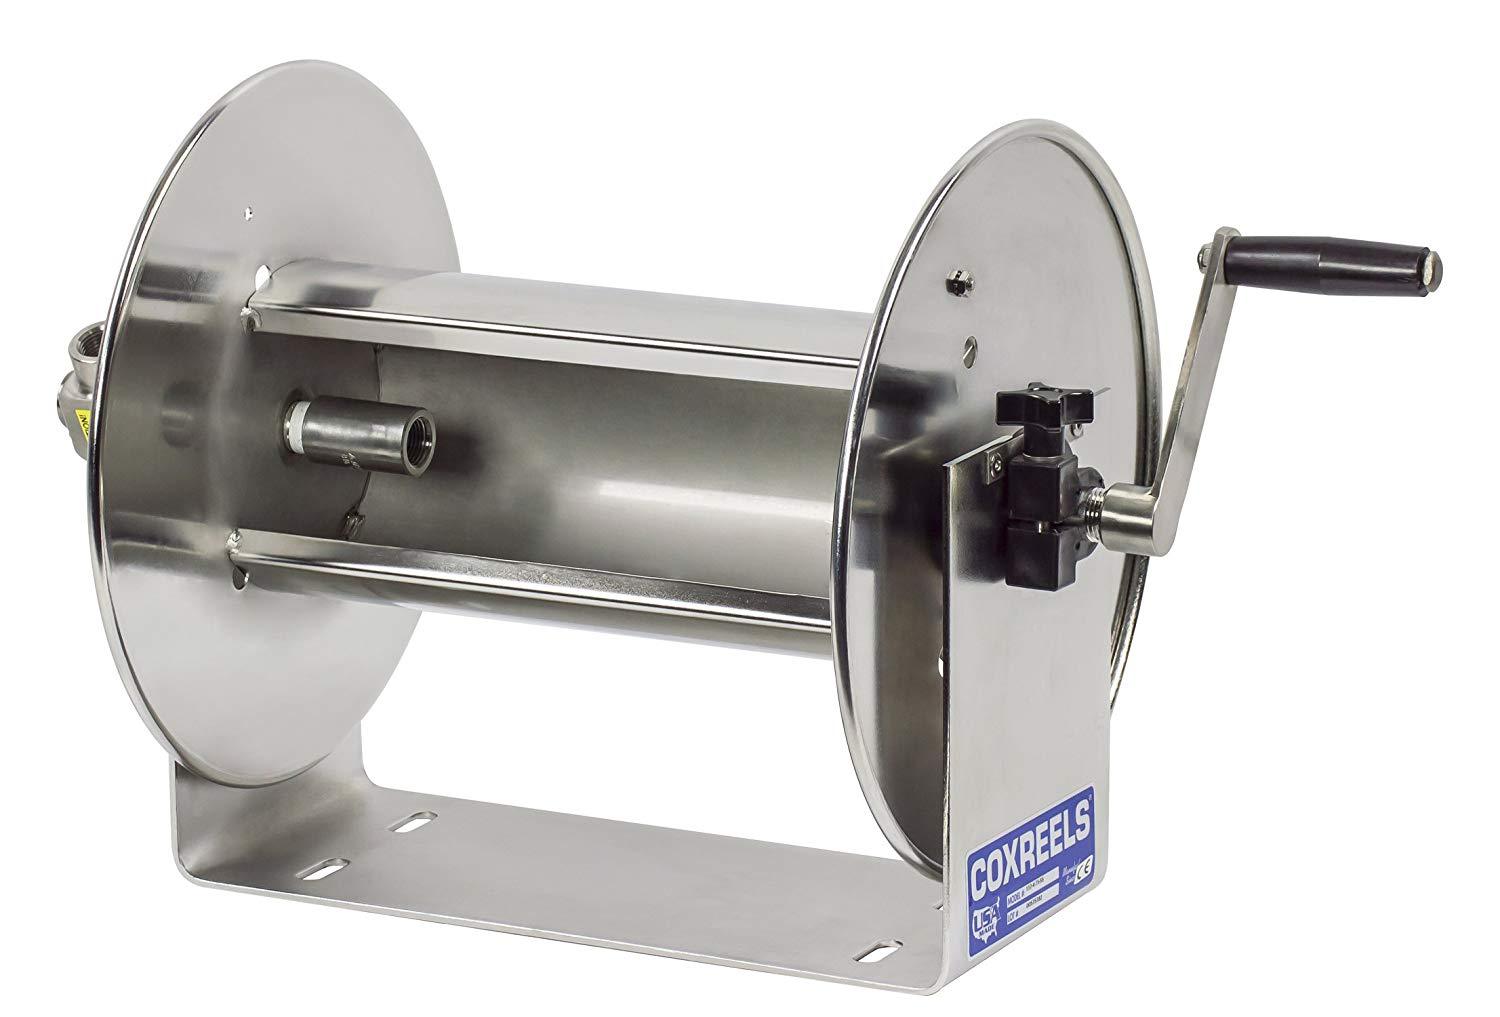 112-4-75-SS : Coxreels 112-4-75-SS Stainless Steel Hand Crank Hose Reel, 1/2" ID, 75' capacity, NO HOSE, 4000psi